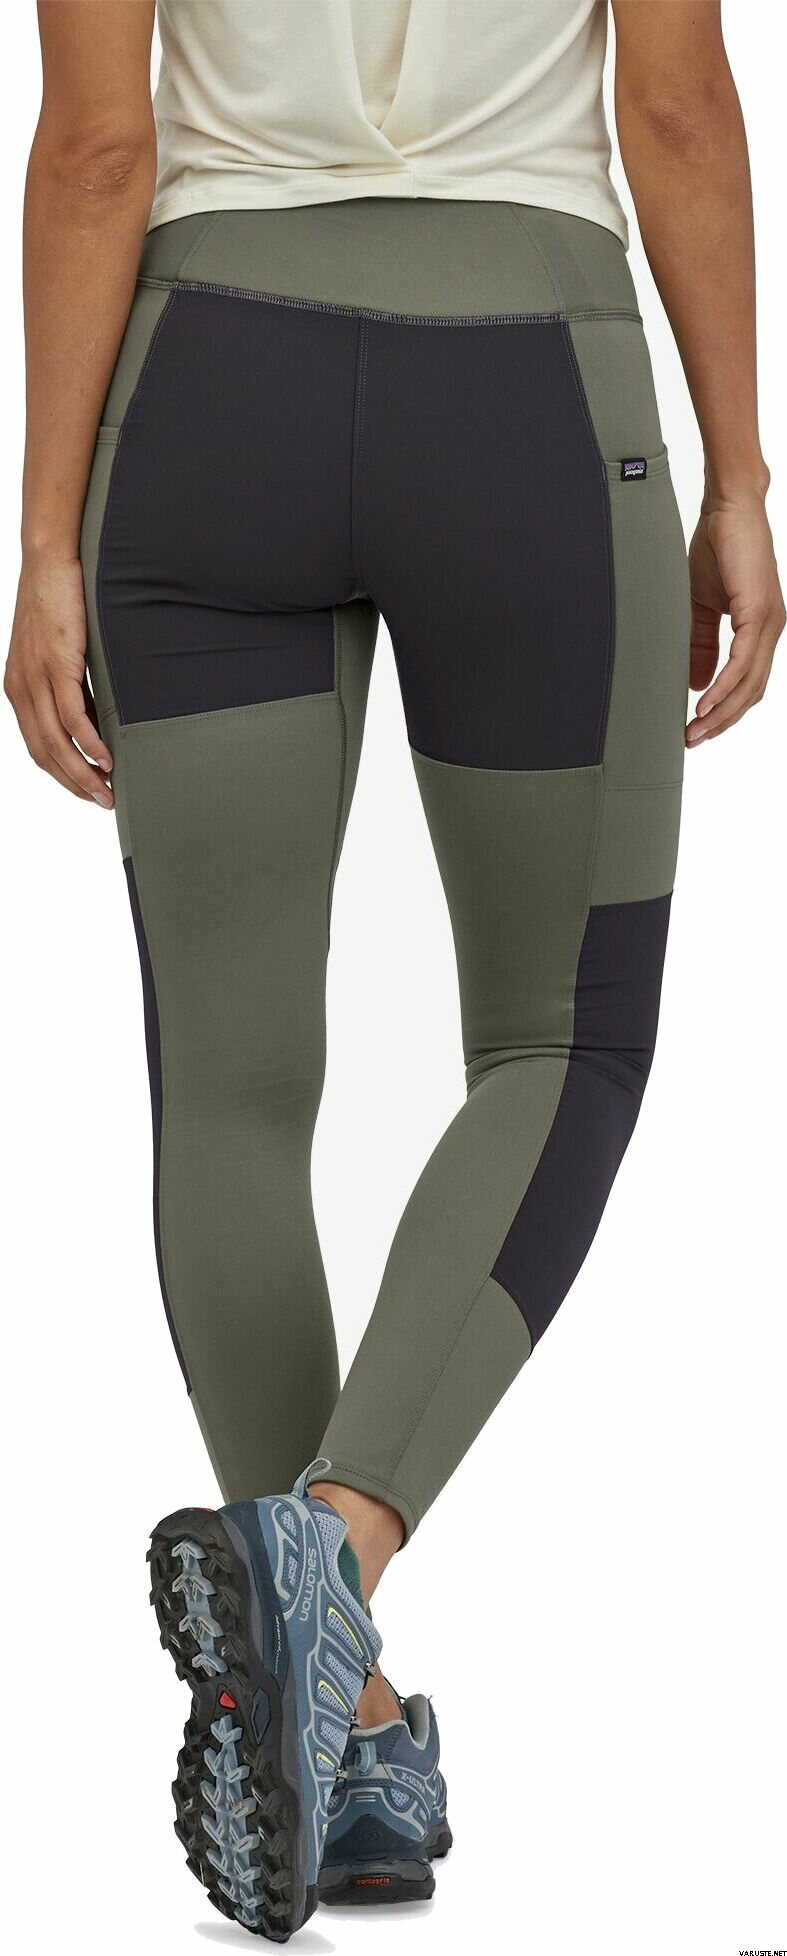 Pack Out Tights Women's